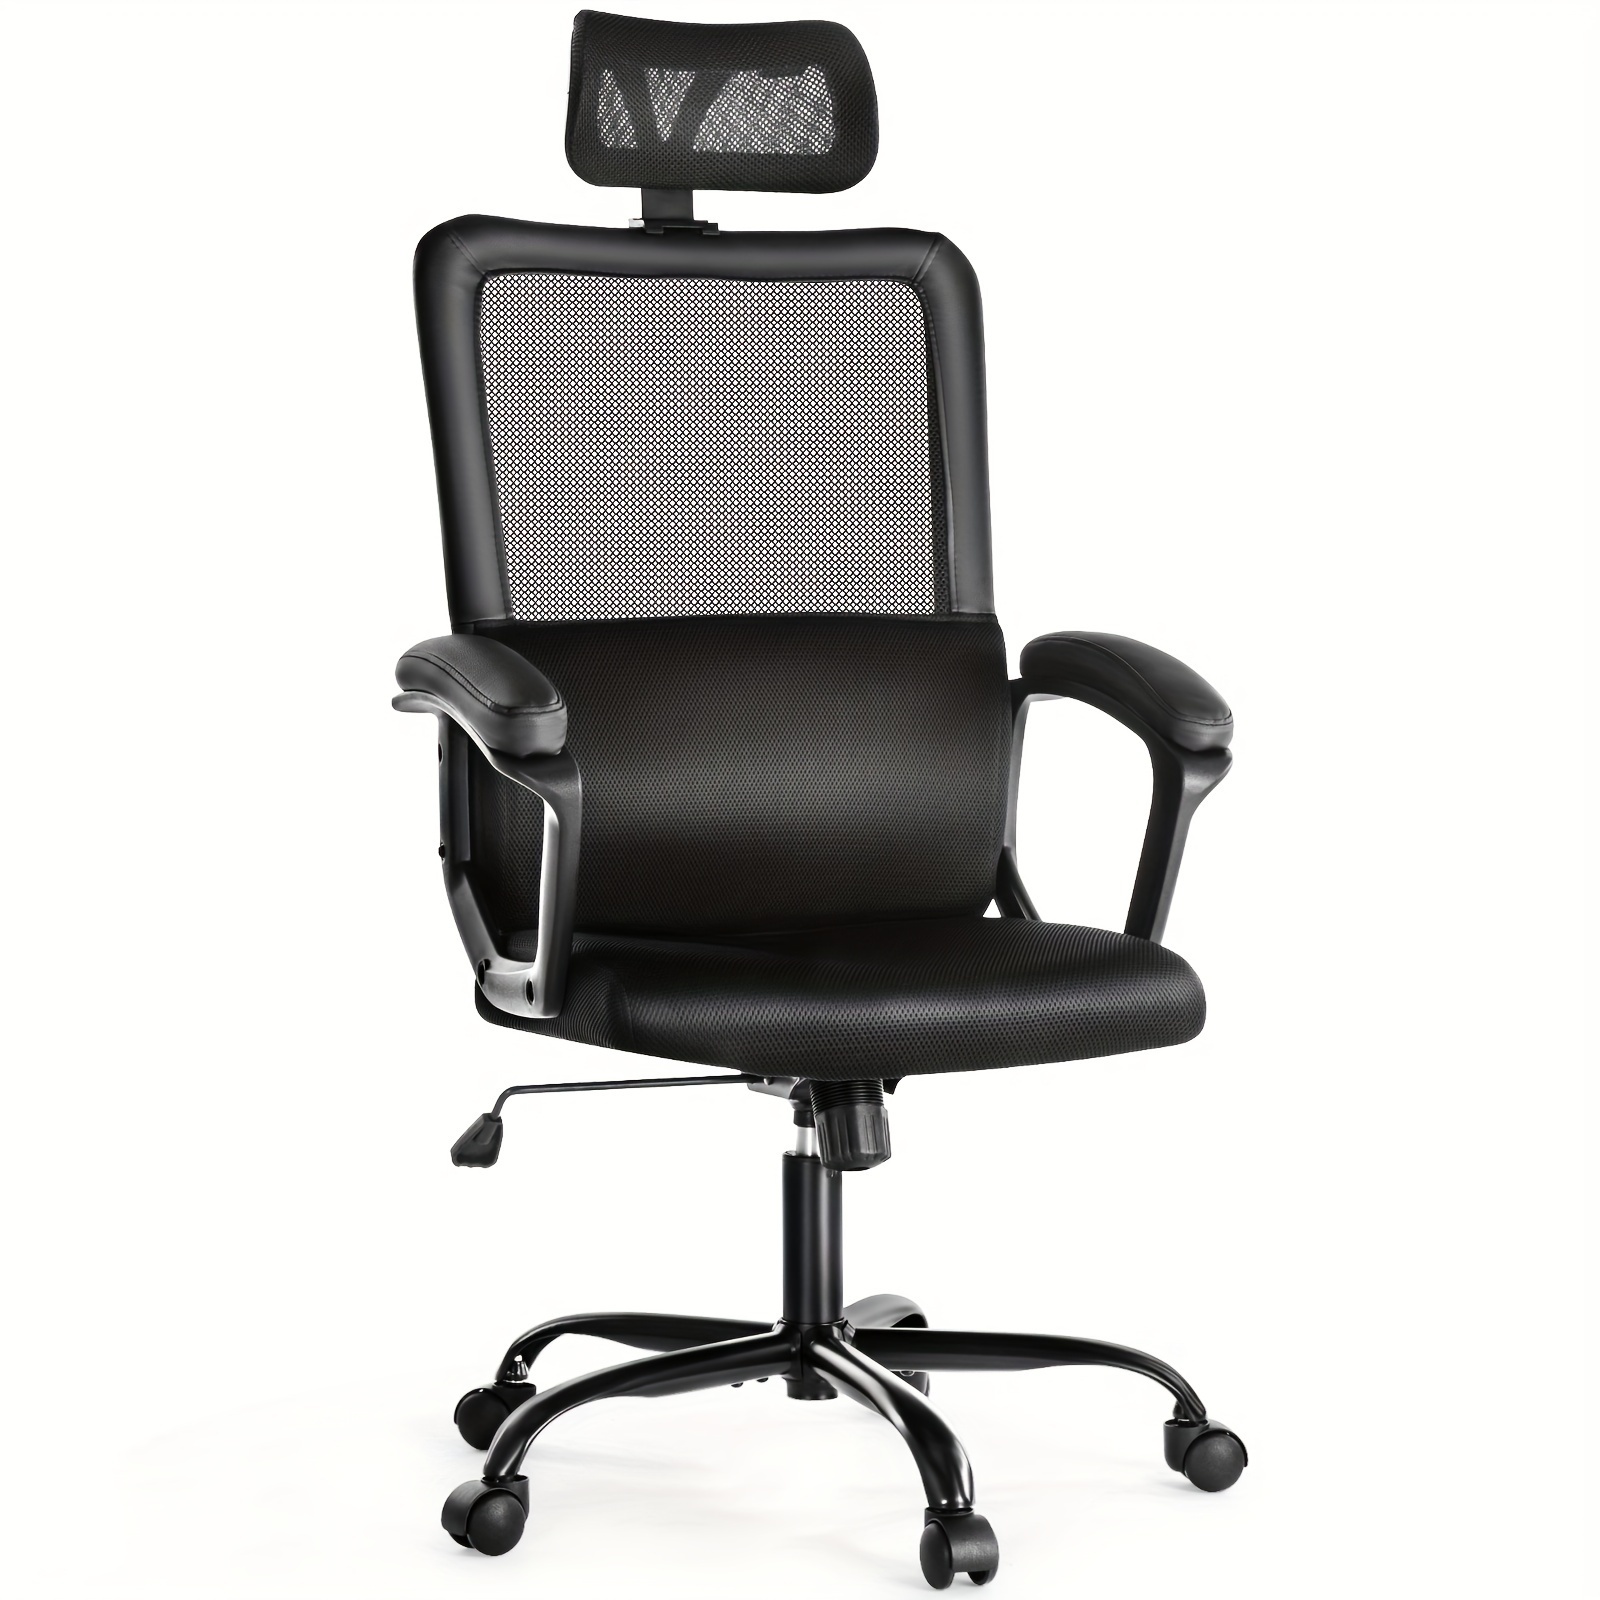 

Ergonomic Office Chair With Lumbar Support, Mesh Home Office Desk Chair With Wheels, High Back Comfy Computer Task Work Swivel Rolling Chair With Adjustable Headrest, Padded Arms